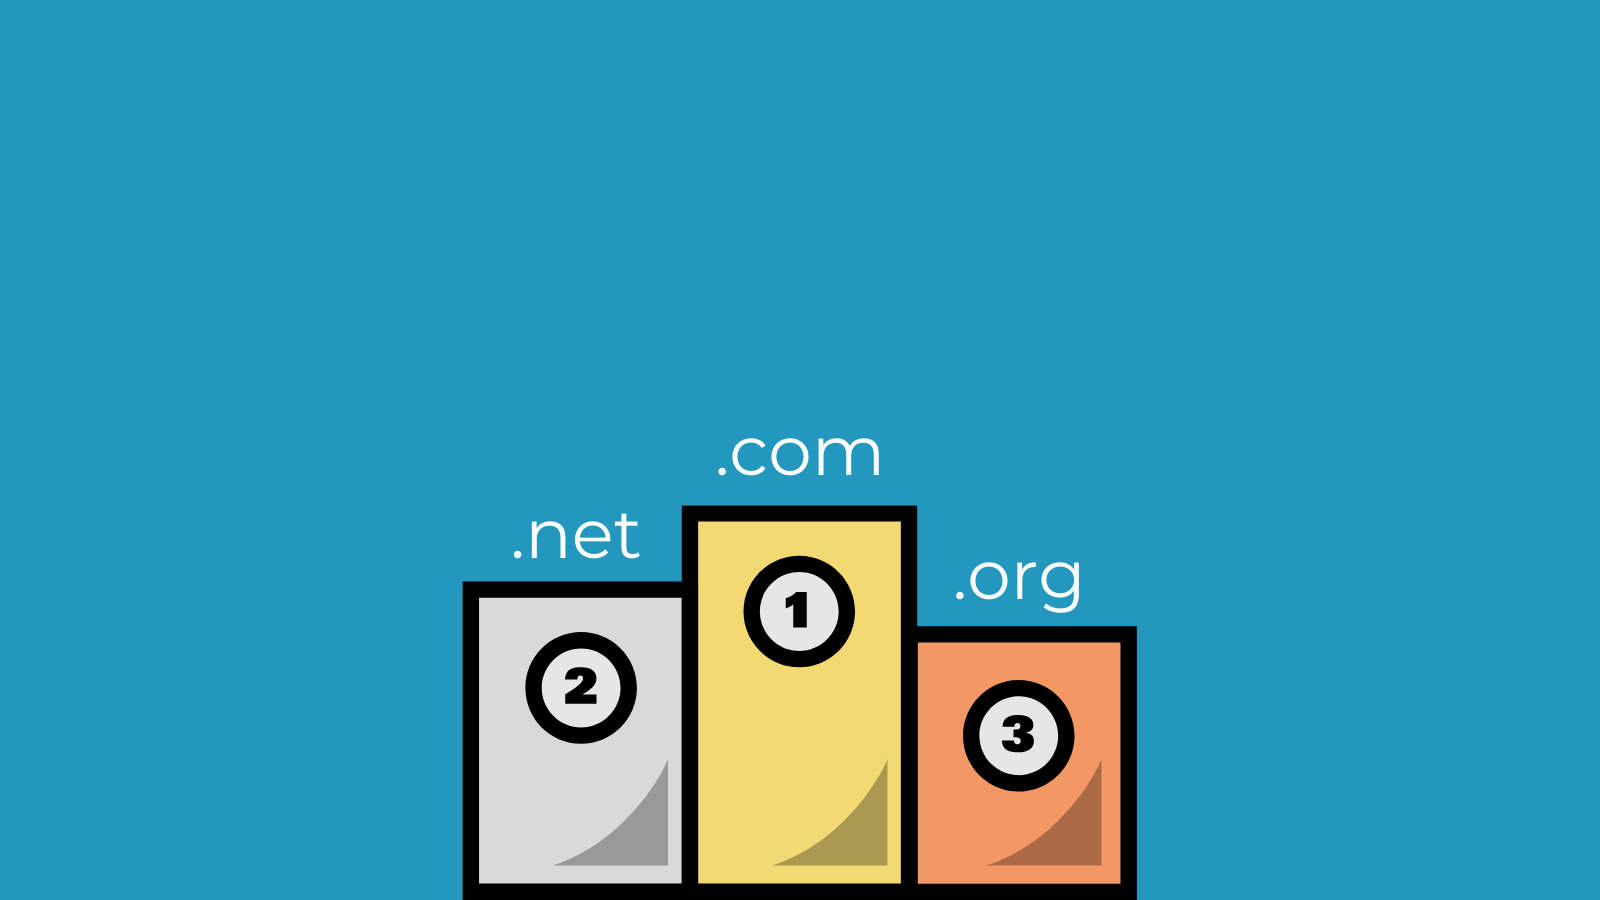 A medal podium with .COM in first place, .NET in second place, and .ORG in third place